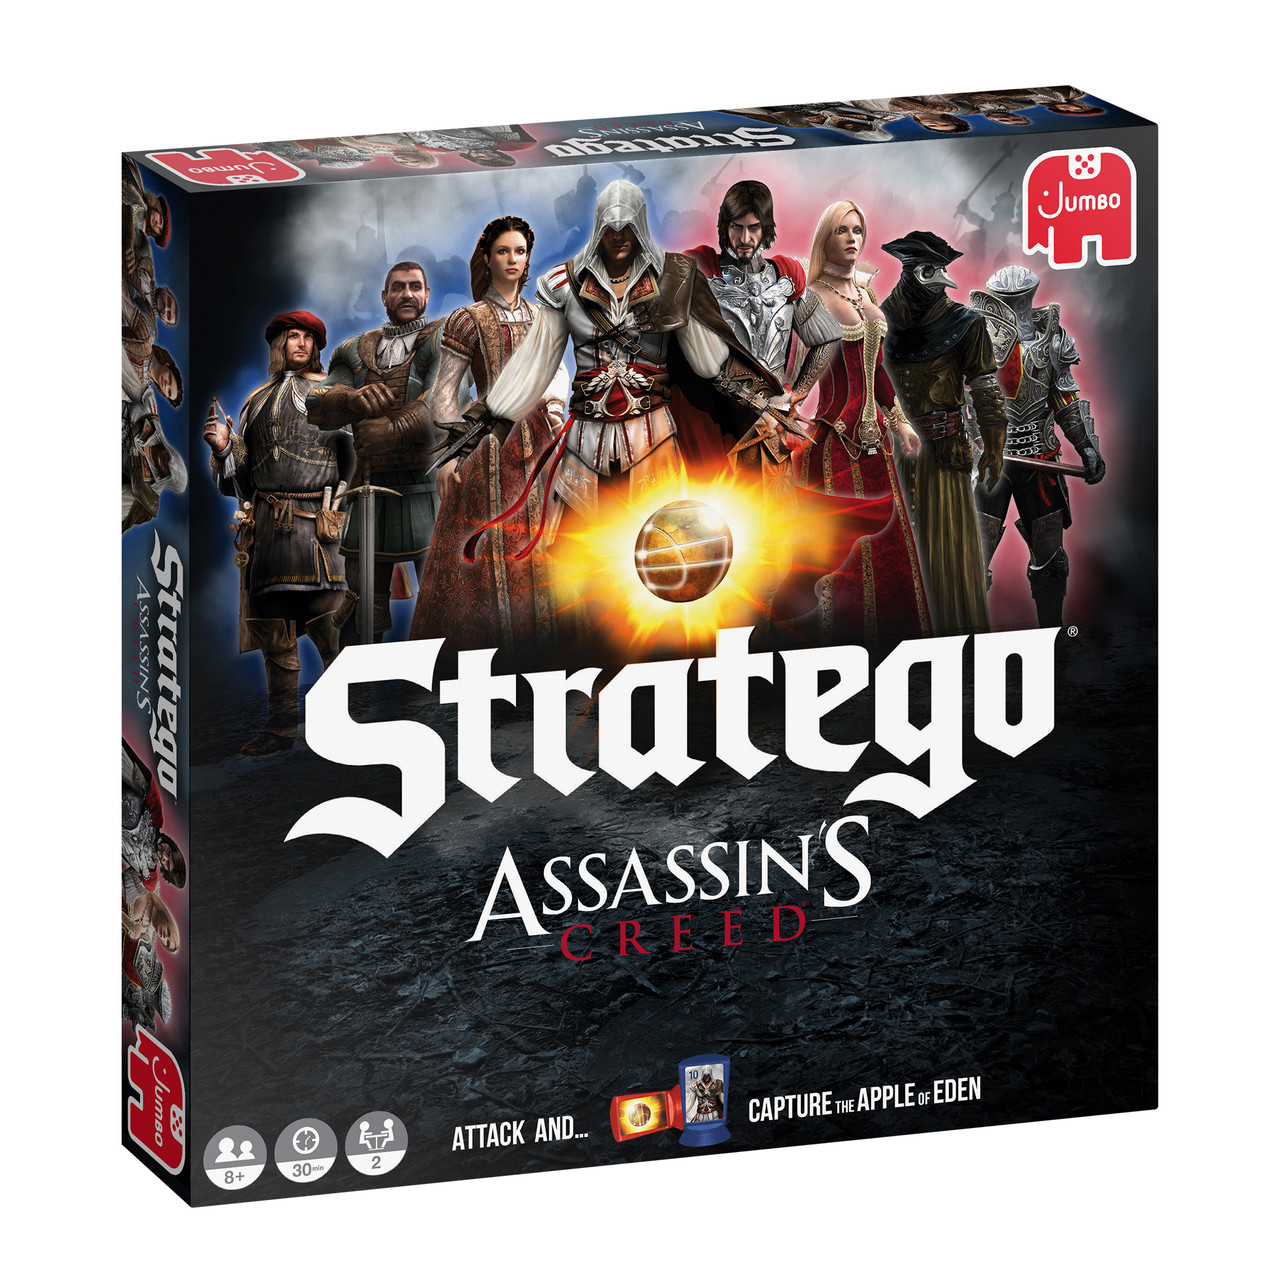 https://cdn11.bigcommerce.com/s-9im8f1/images/stencil/1280x1280/products/10105/13638/19815_Stratego_Assassins_Creed_2__13431.1685463077.jpg?c=2